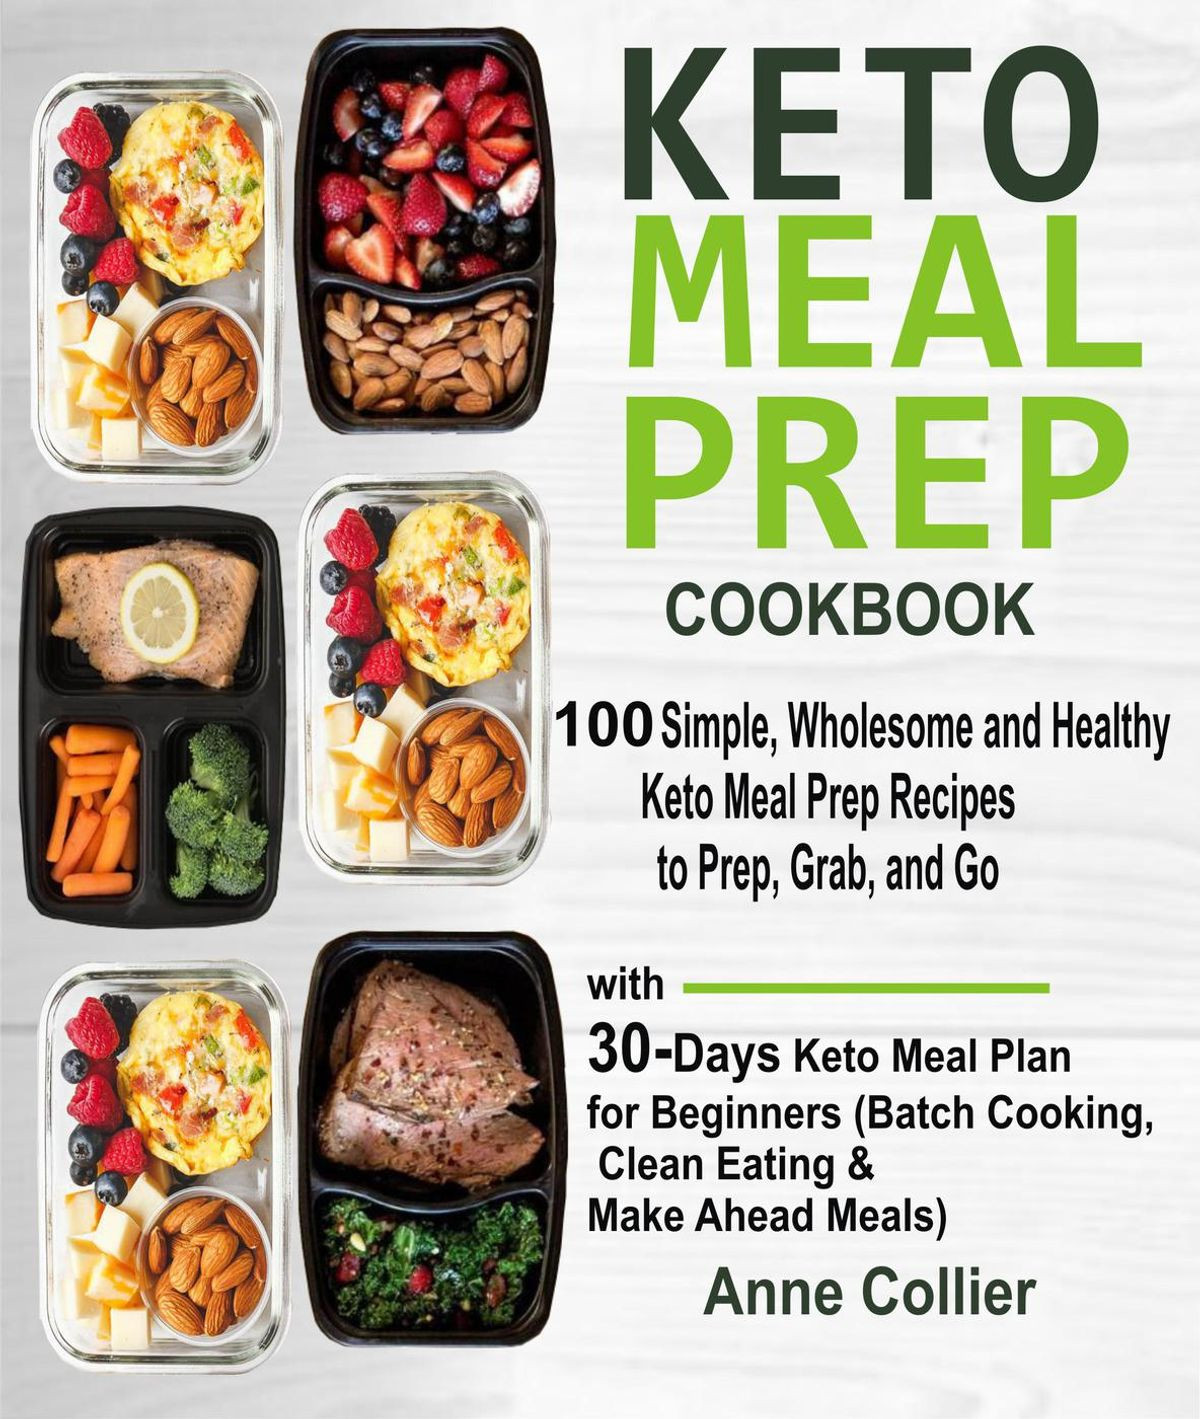 Clean Keto Meal Plan Recipes
 Keto Meal Prep Cookbook 100 Simple Wholesome and Healthy